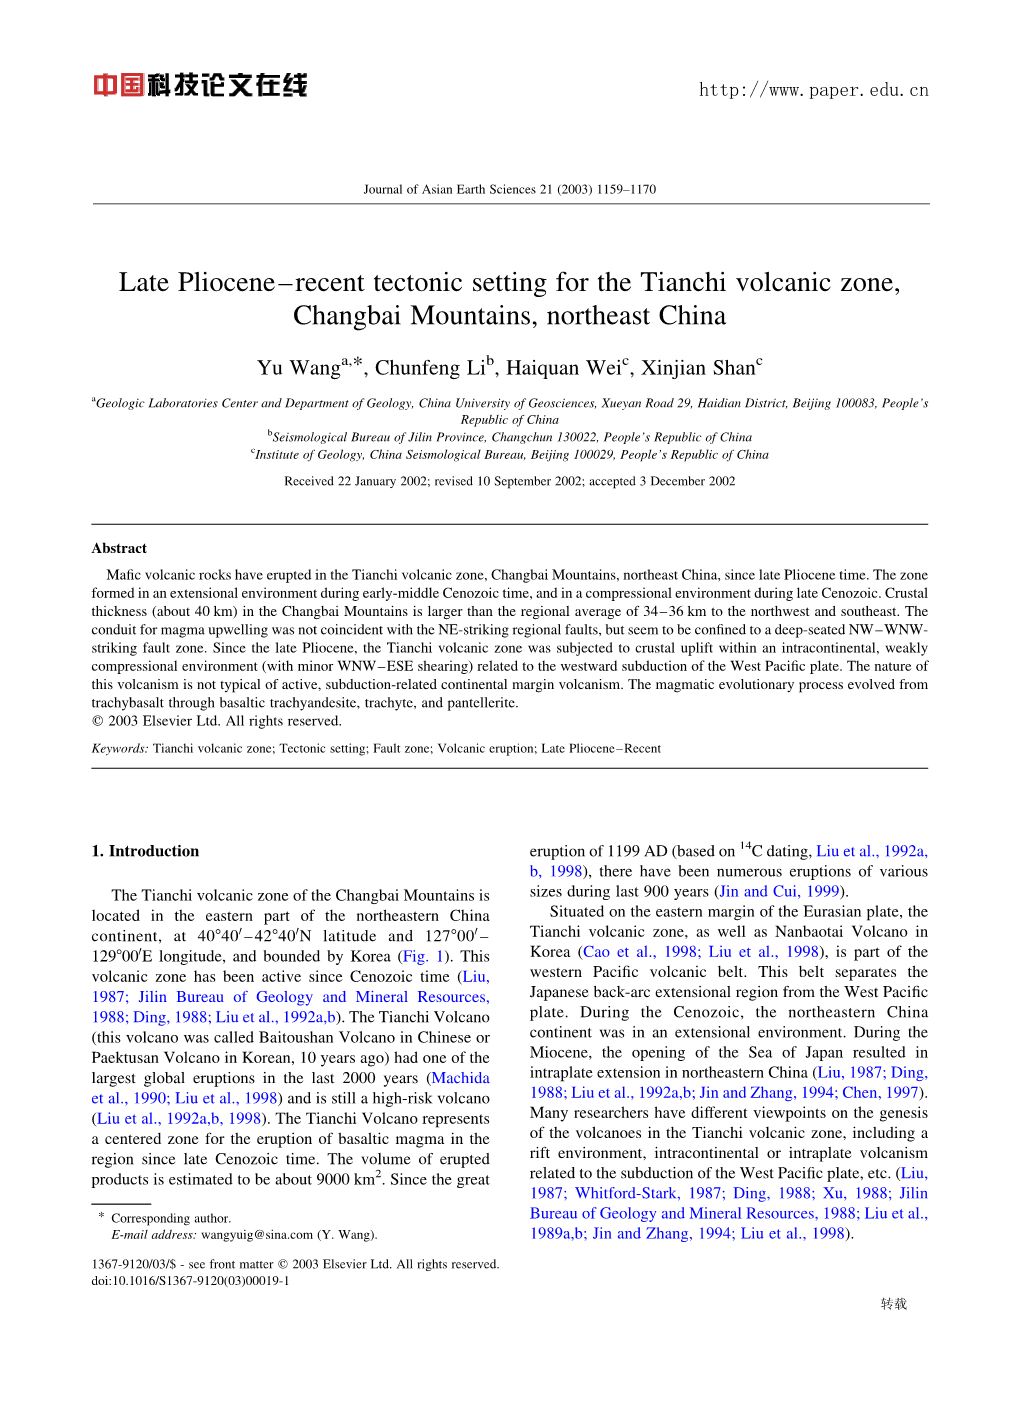 Late Pliocene–Recent Tectonic Setting for the Tianchi Volcanic Zone, Changbai Mountains, Northeast China